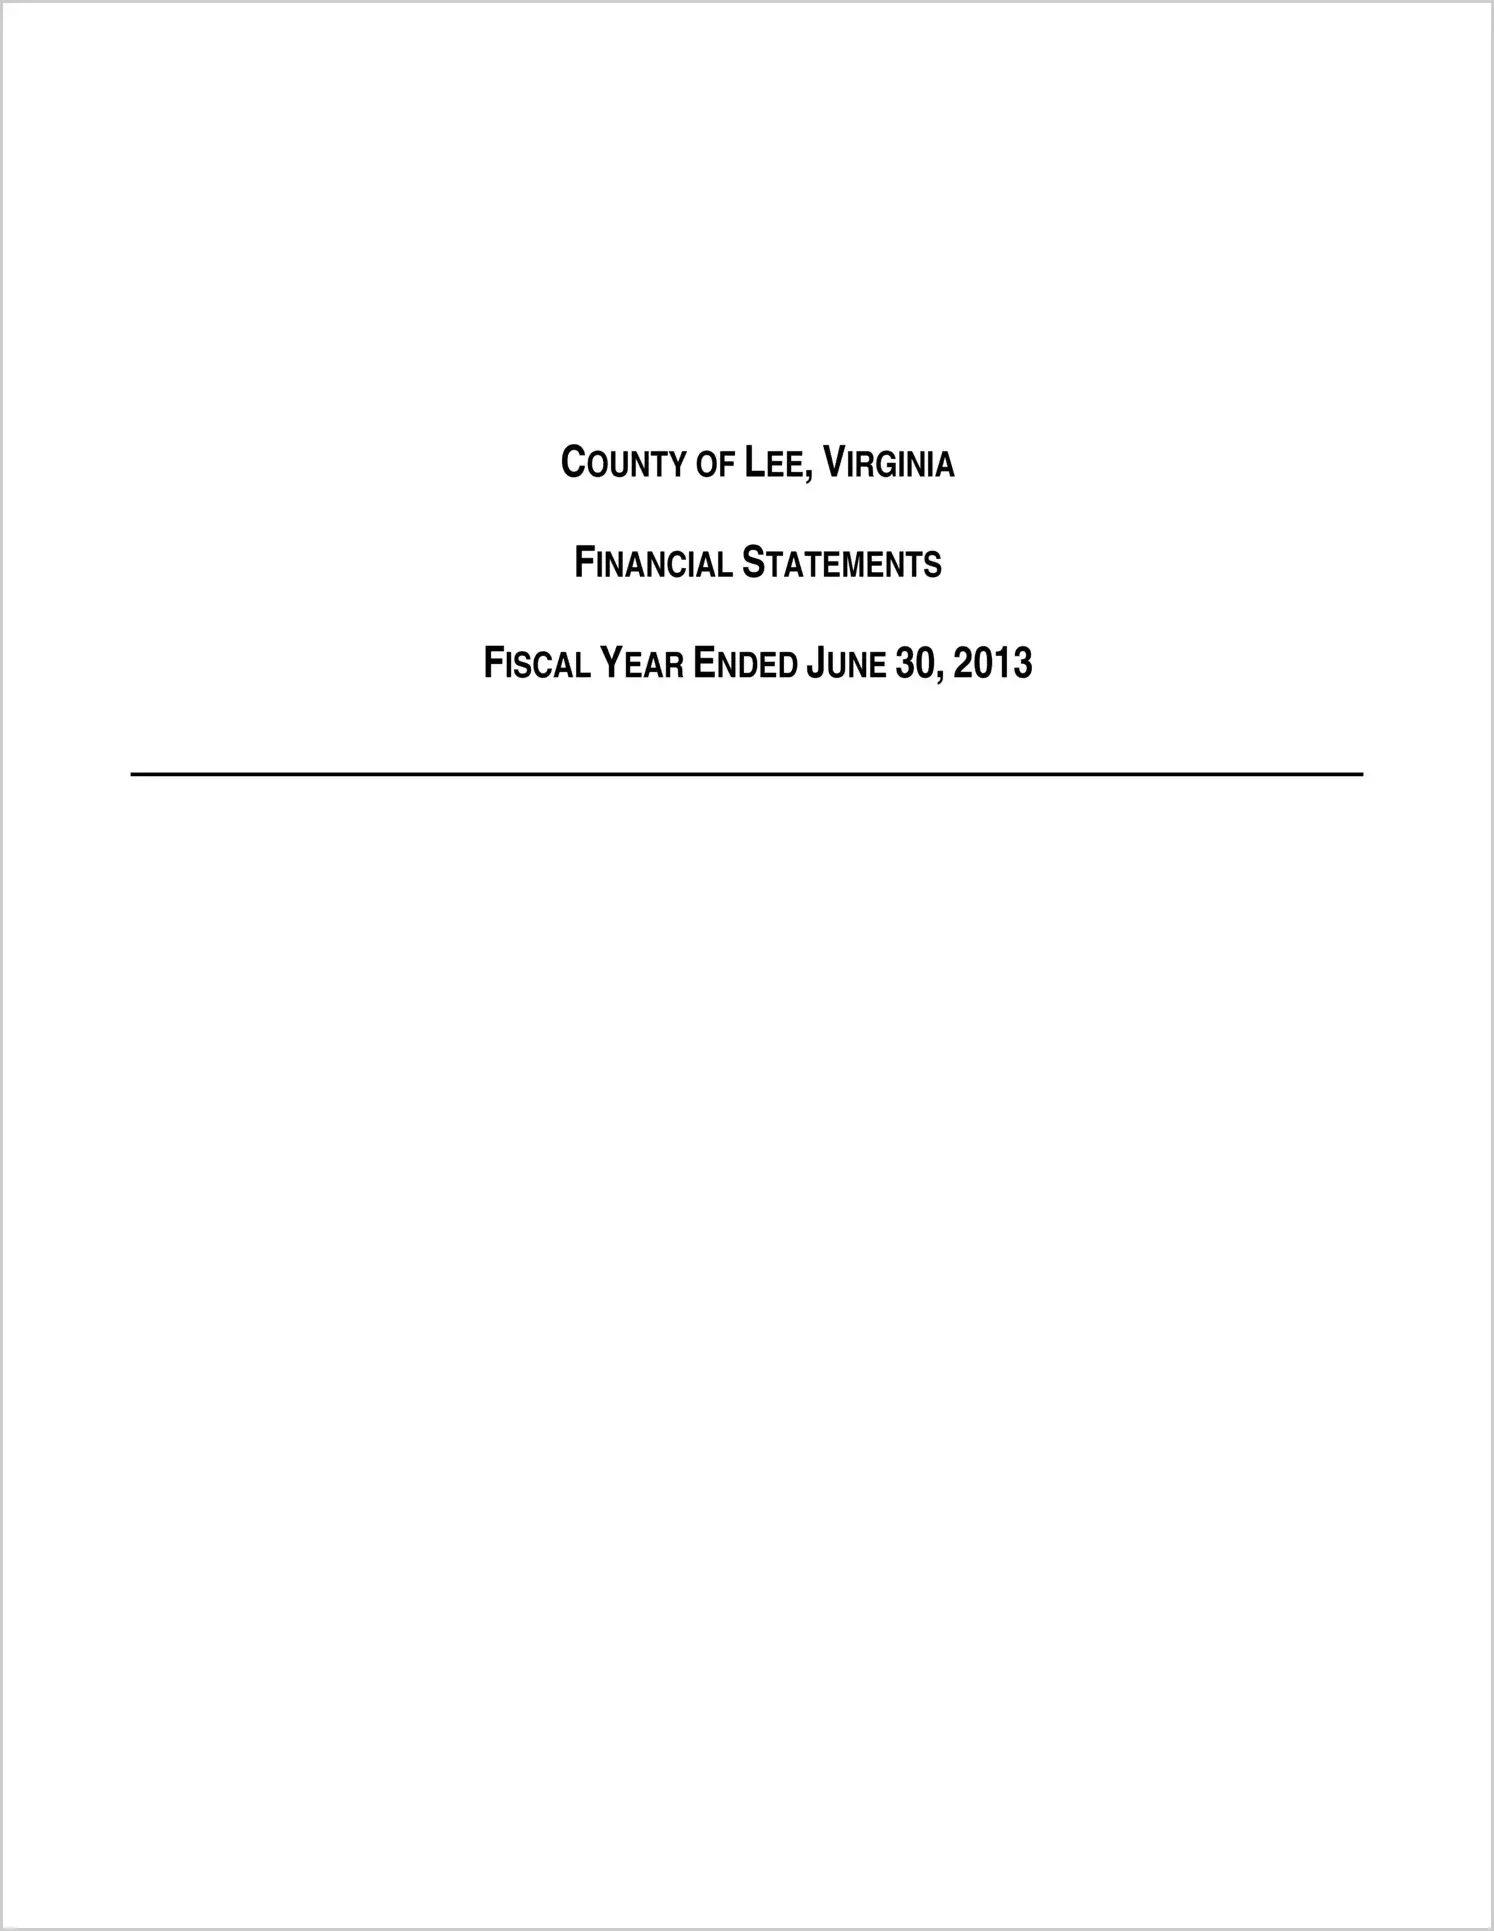 2013 Annual Financial Report for County of Lee